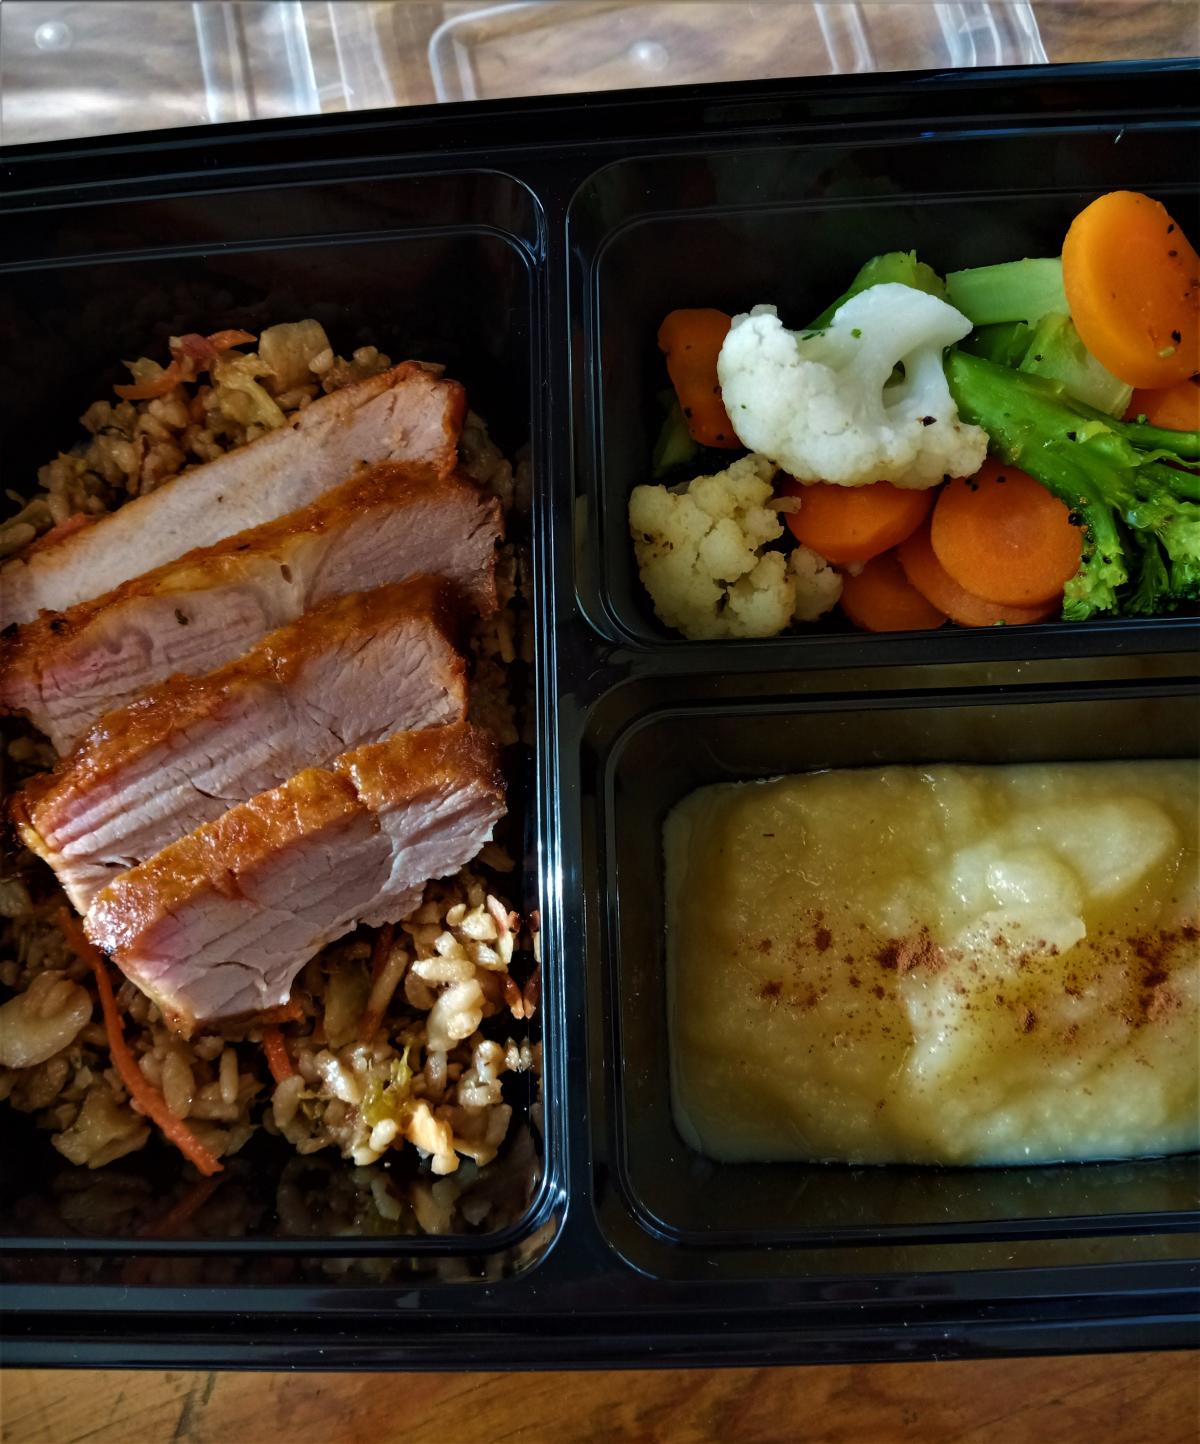 Think inside the box for perfect portions